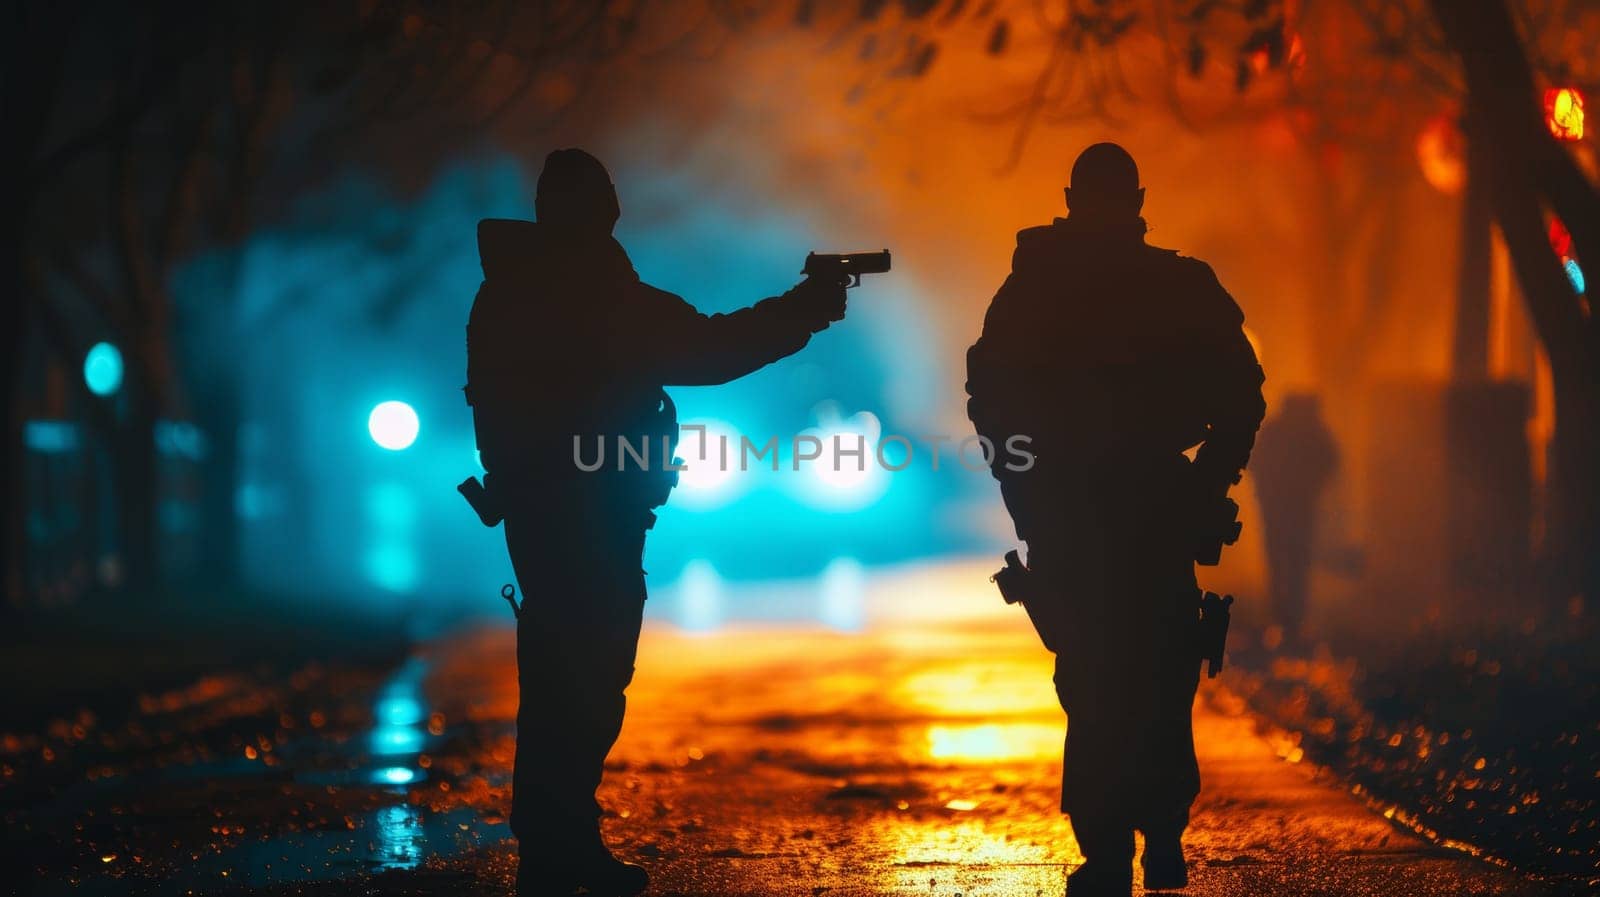 Two men standing in the dark holding a gun and pointing it at each other